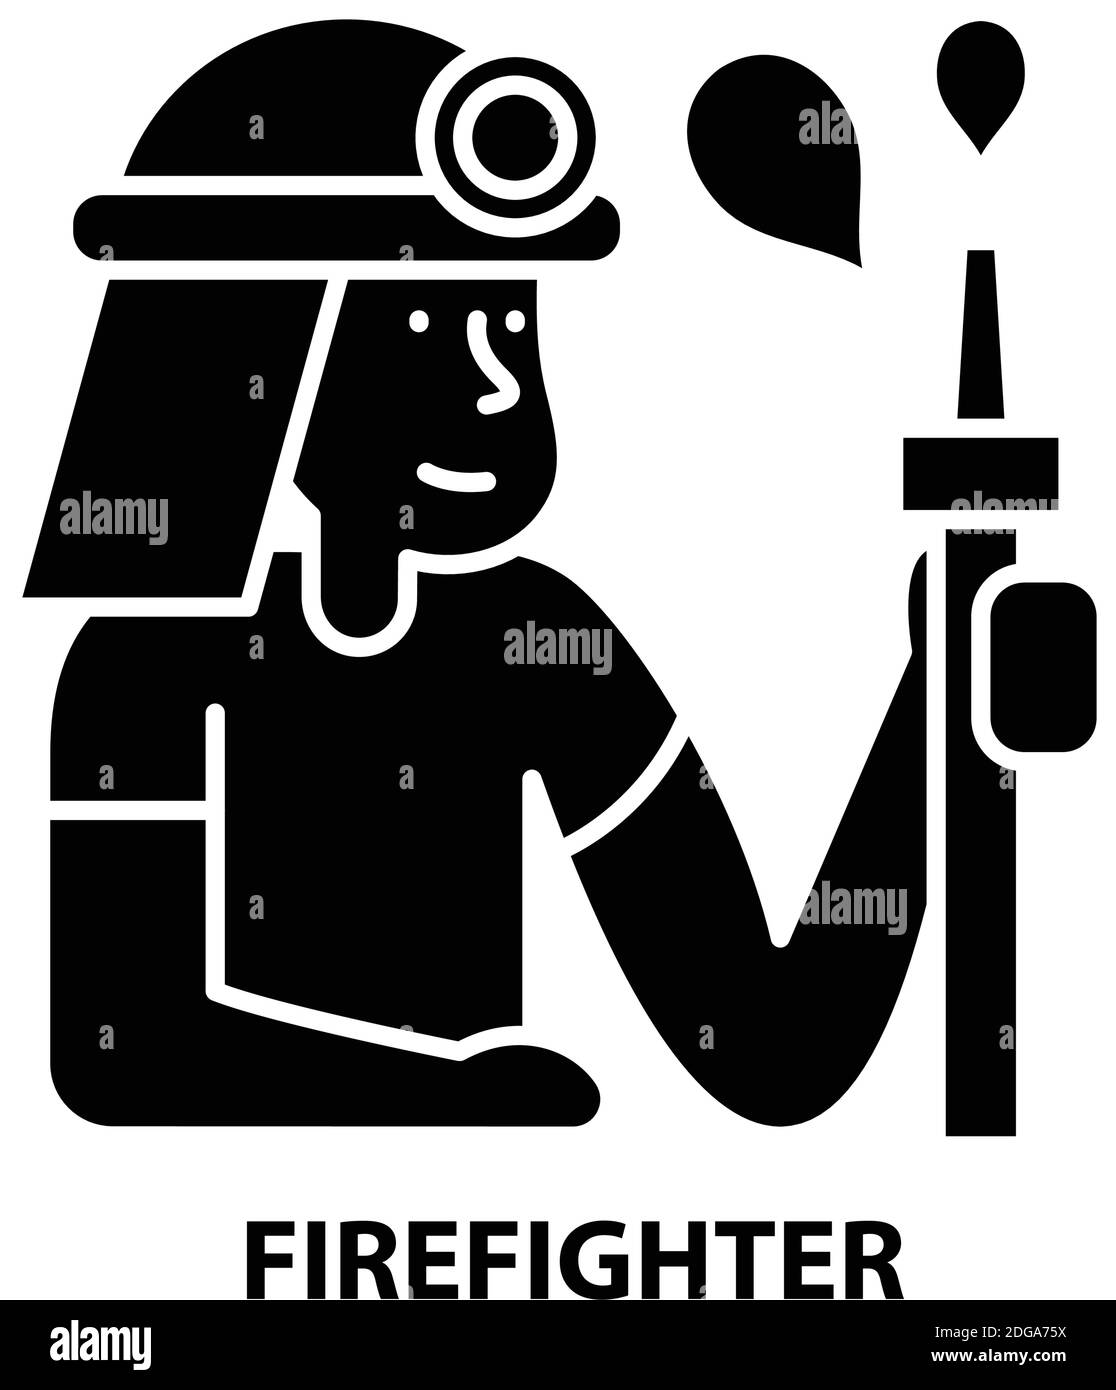 firefighter icon, black vector sign with editable strokes, concept illustration Stock Vector